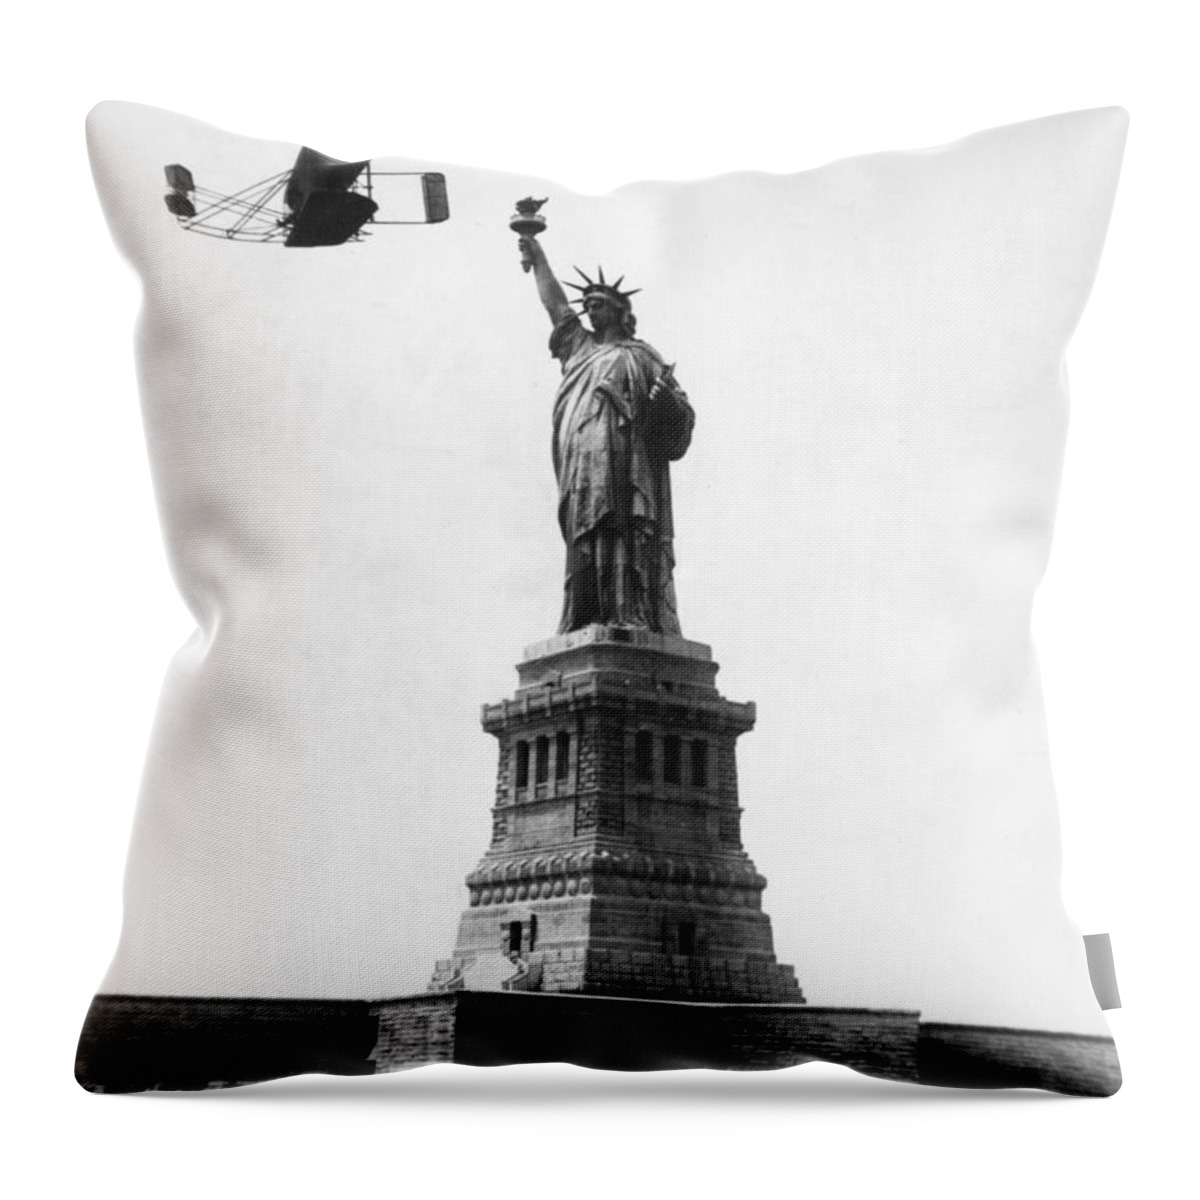 1909 Throw Pillow featuring the photograph Statue Of Liberty, 1909 #1 by Granger